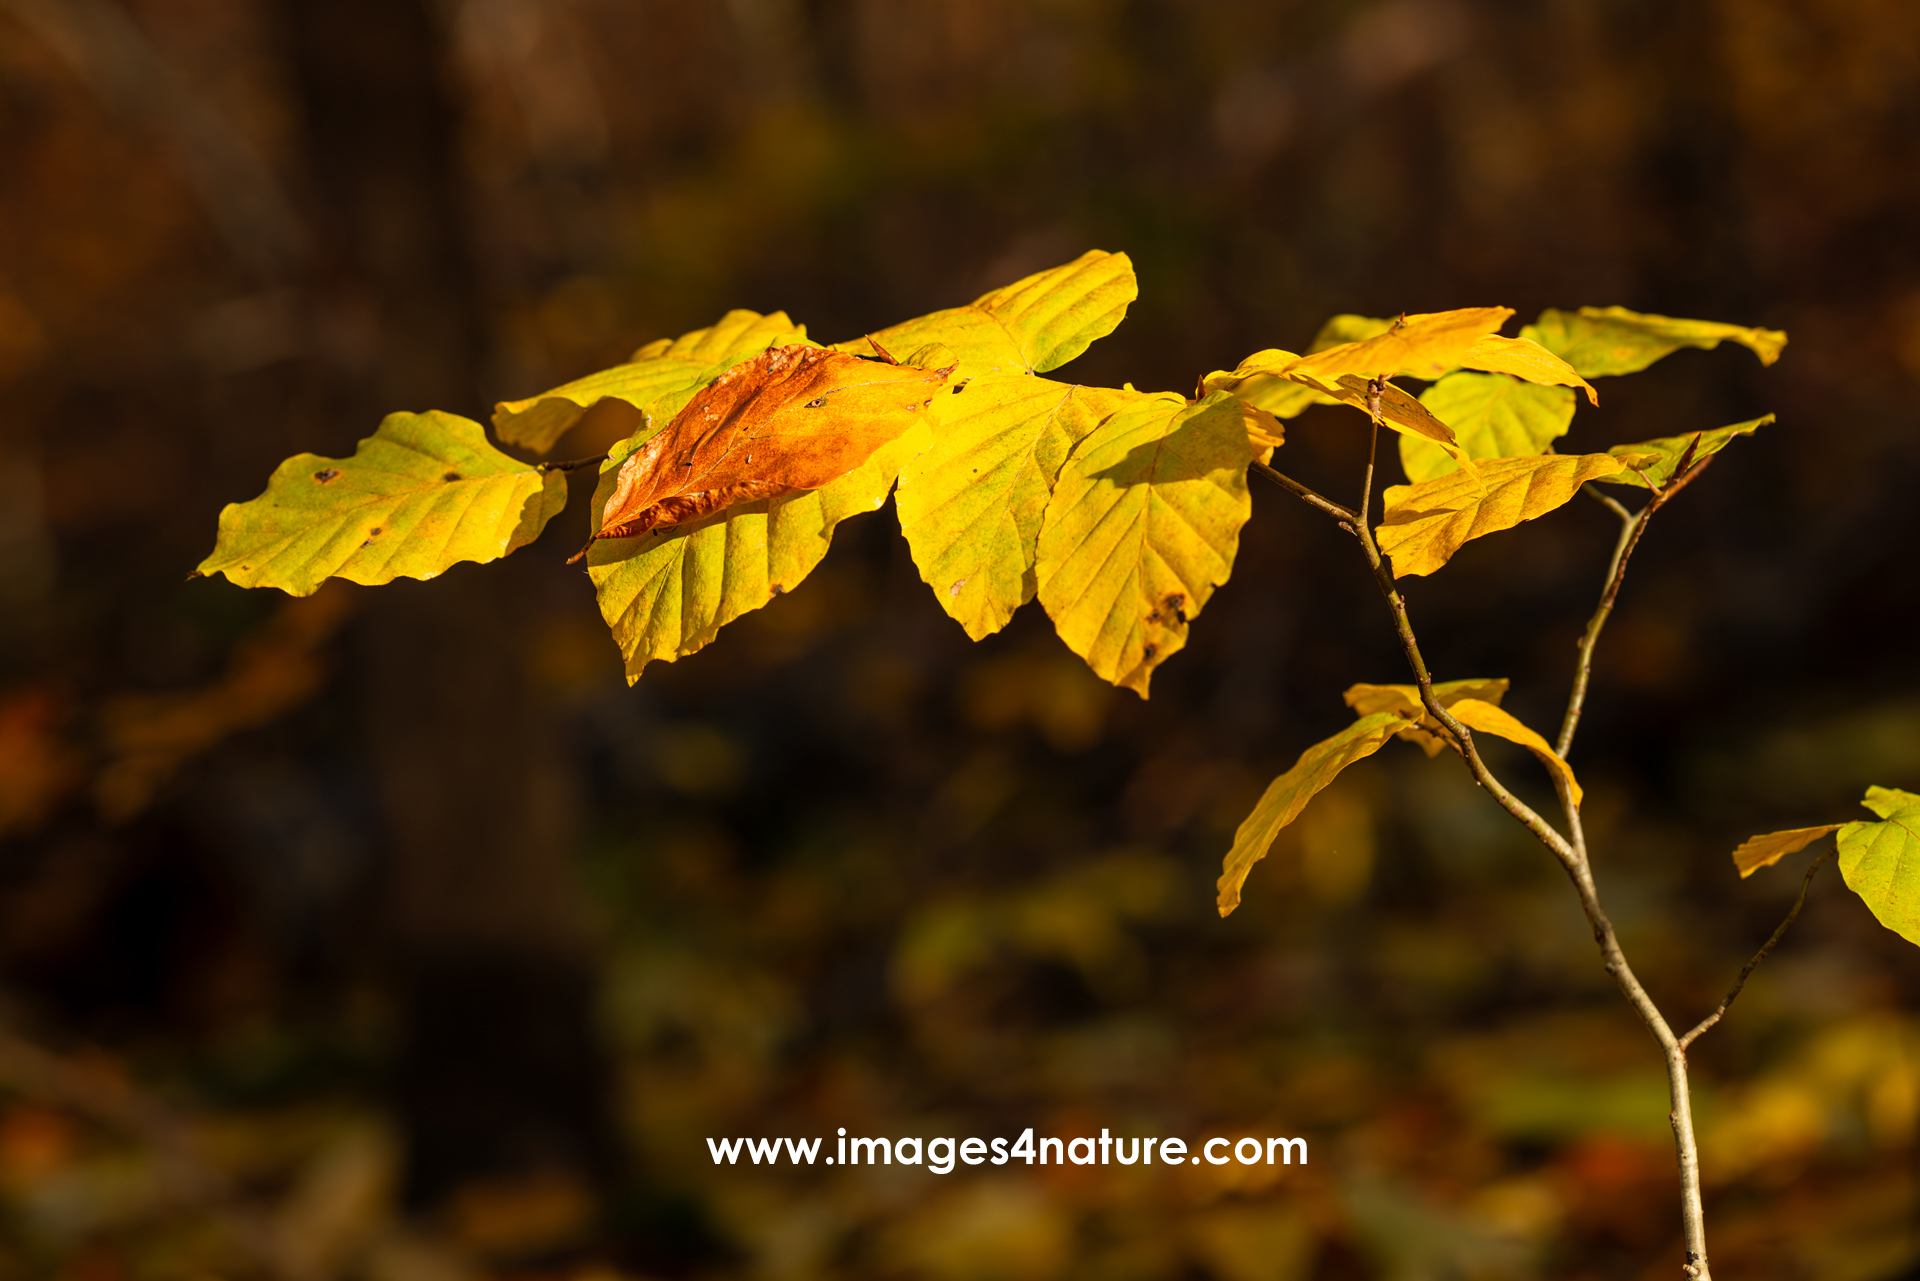 One brown leaf laying on top of a branch with yellow leaves